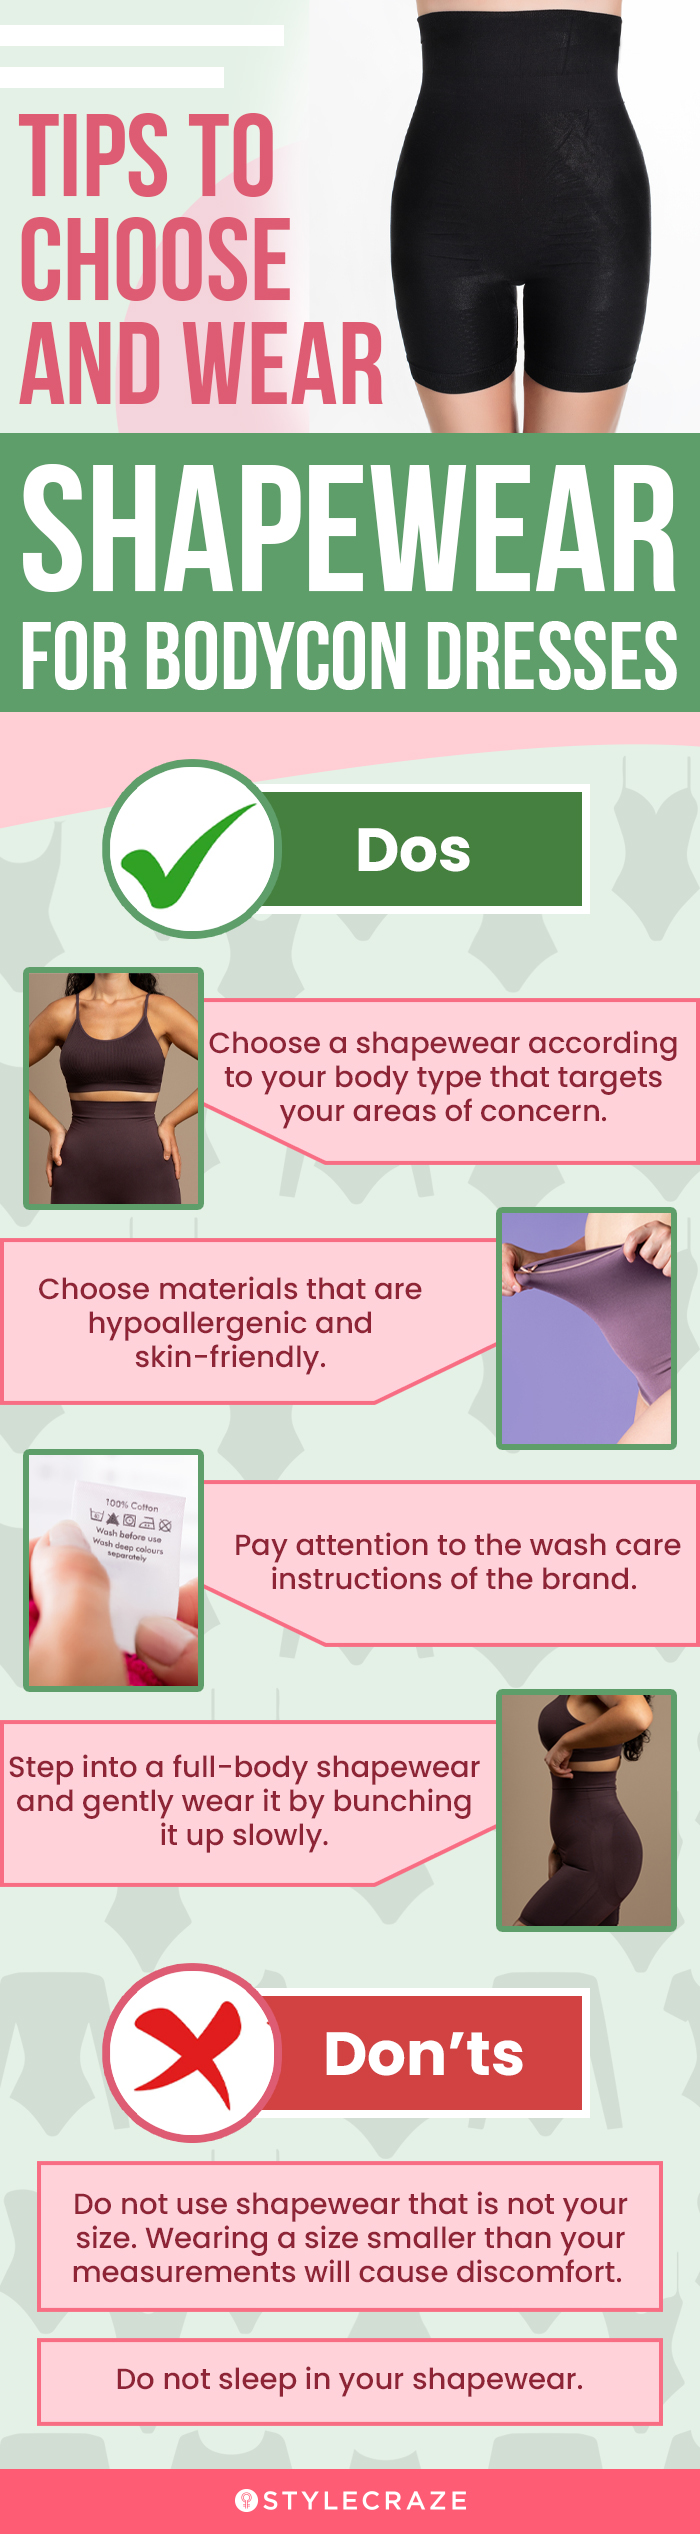 Tips To Choose And Wear A Shapewear For Bodycon Dresses